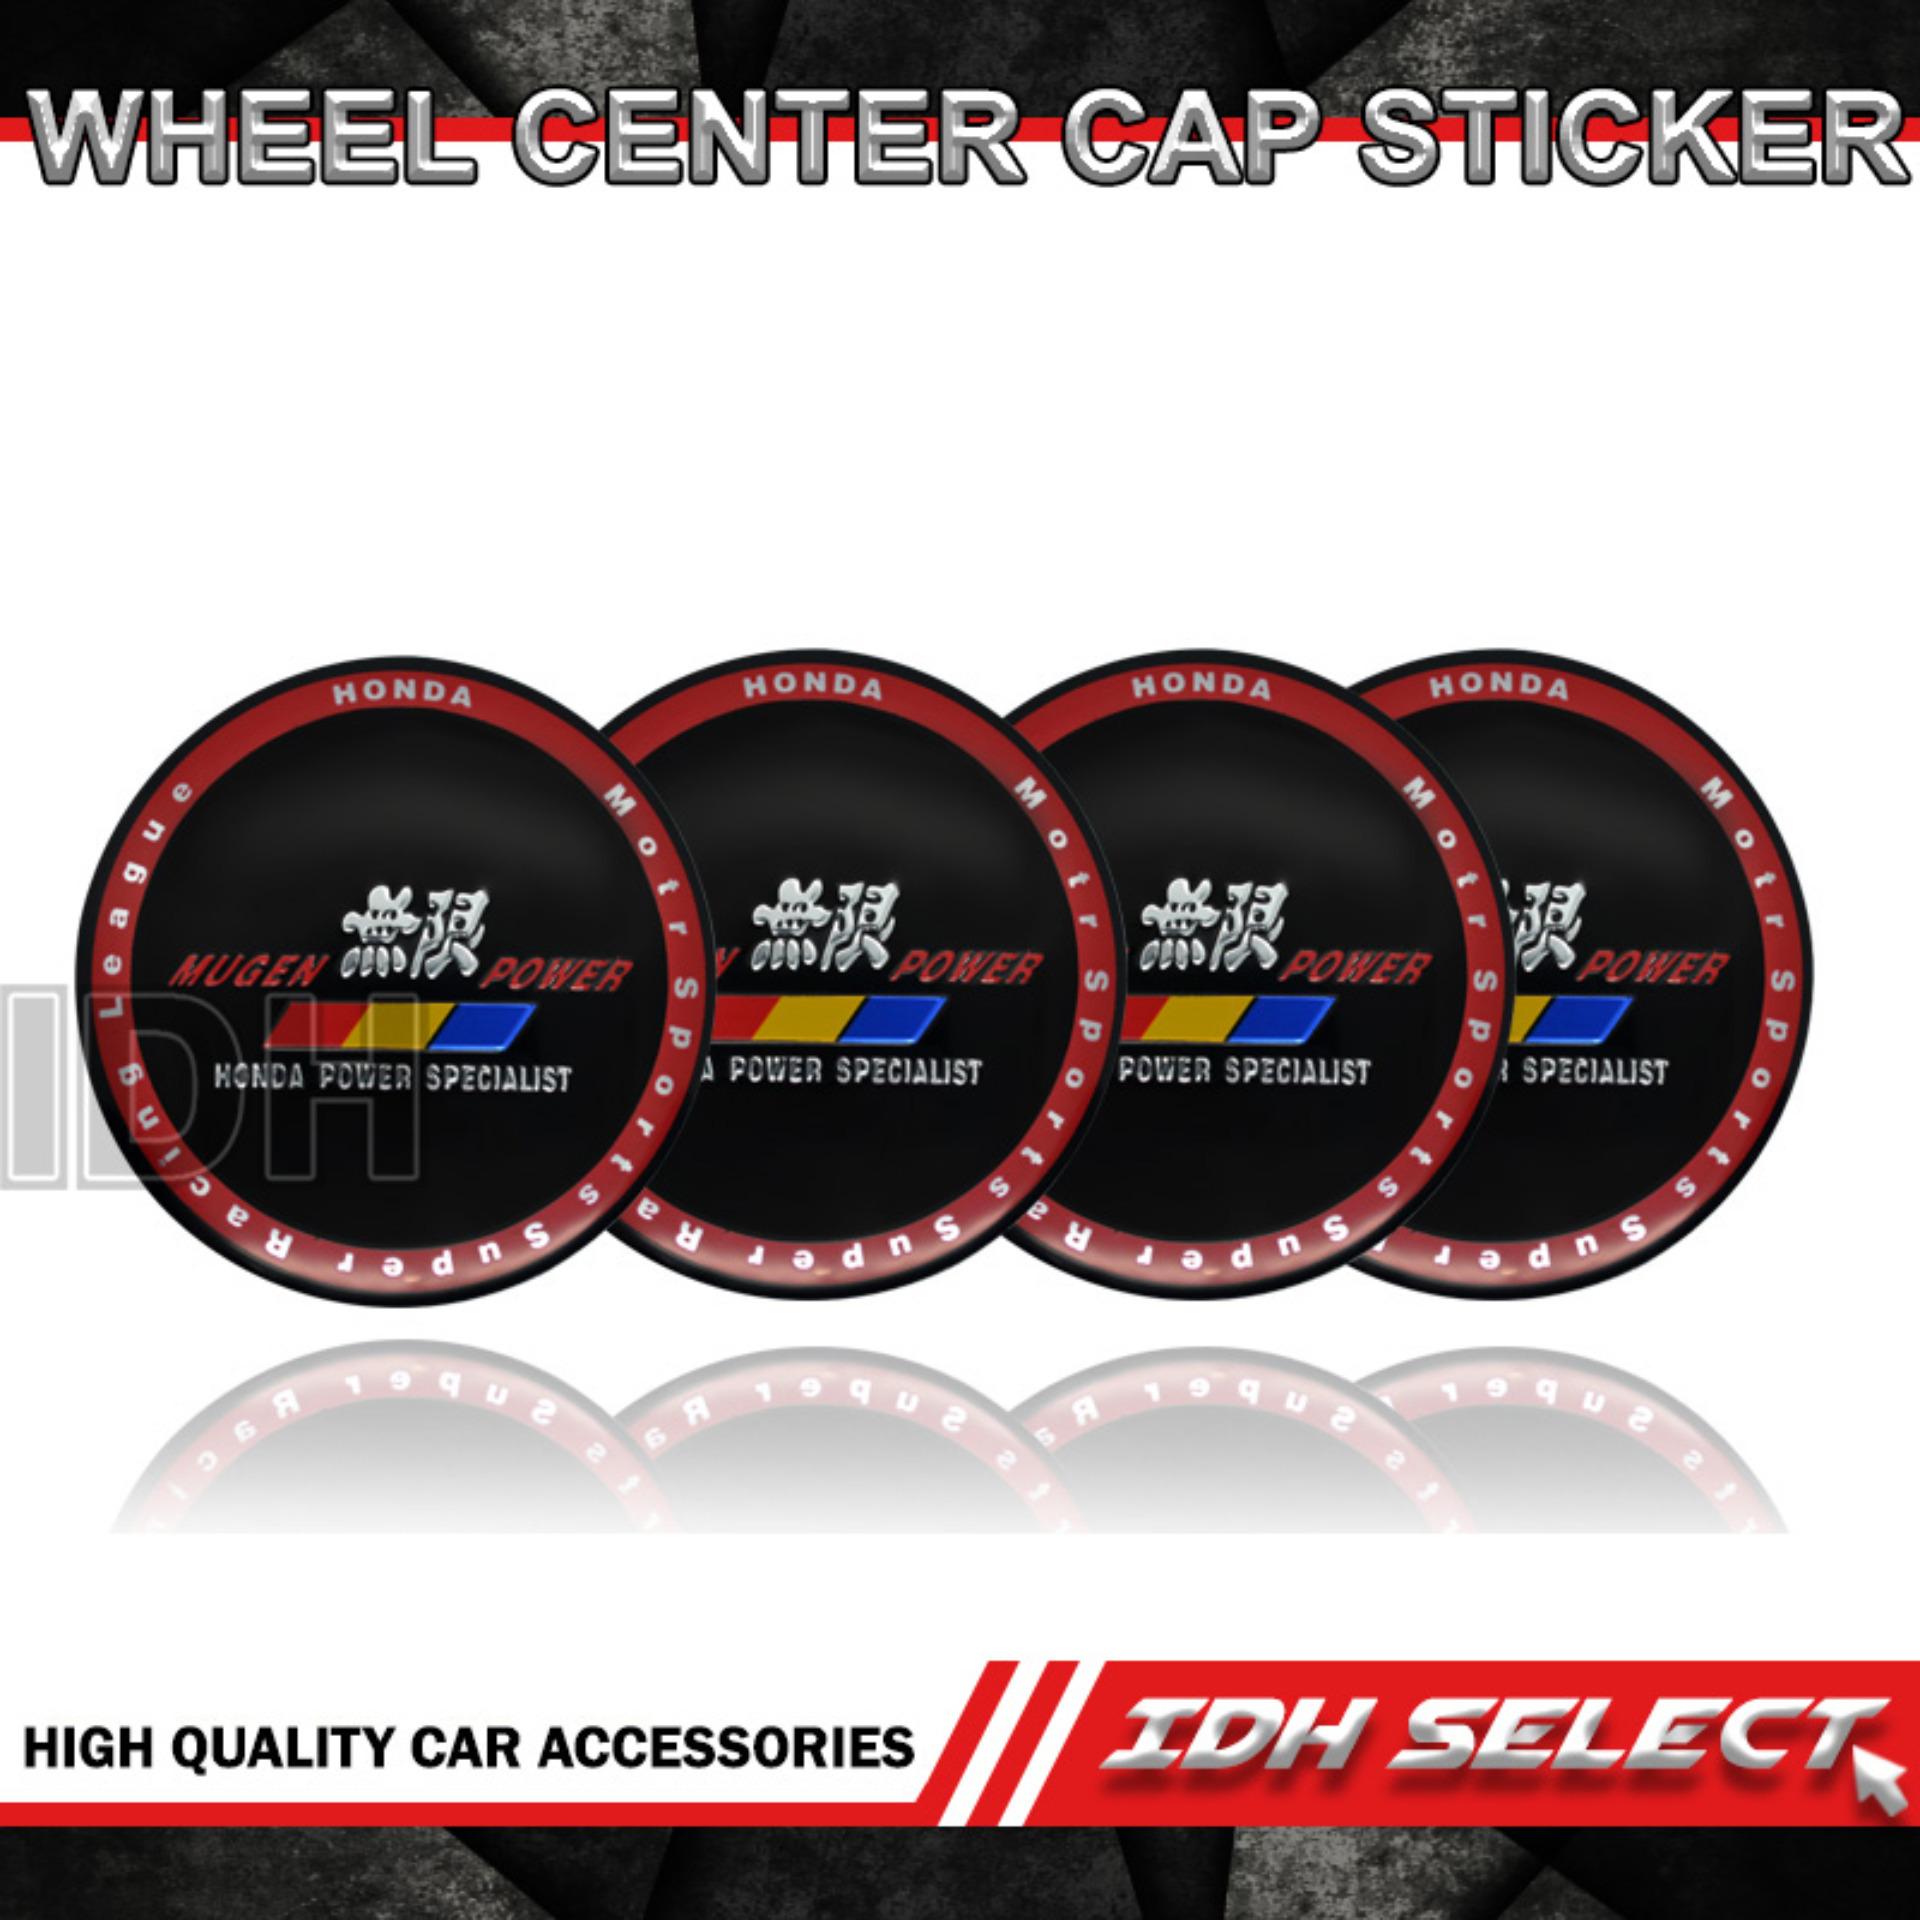 Mugen Power Car Wheel Center Cap Badge Aluminum Metal Sticker Wc-Mug-1 IDH  Select [Car Accessories Local Seller Faster Shipping Available On Hand]